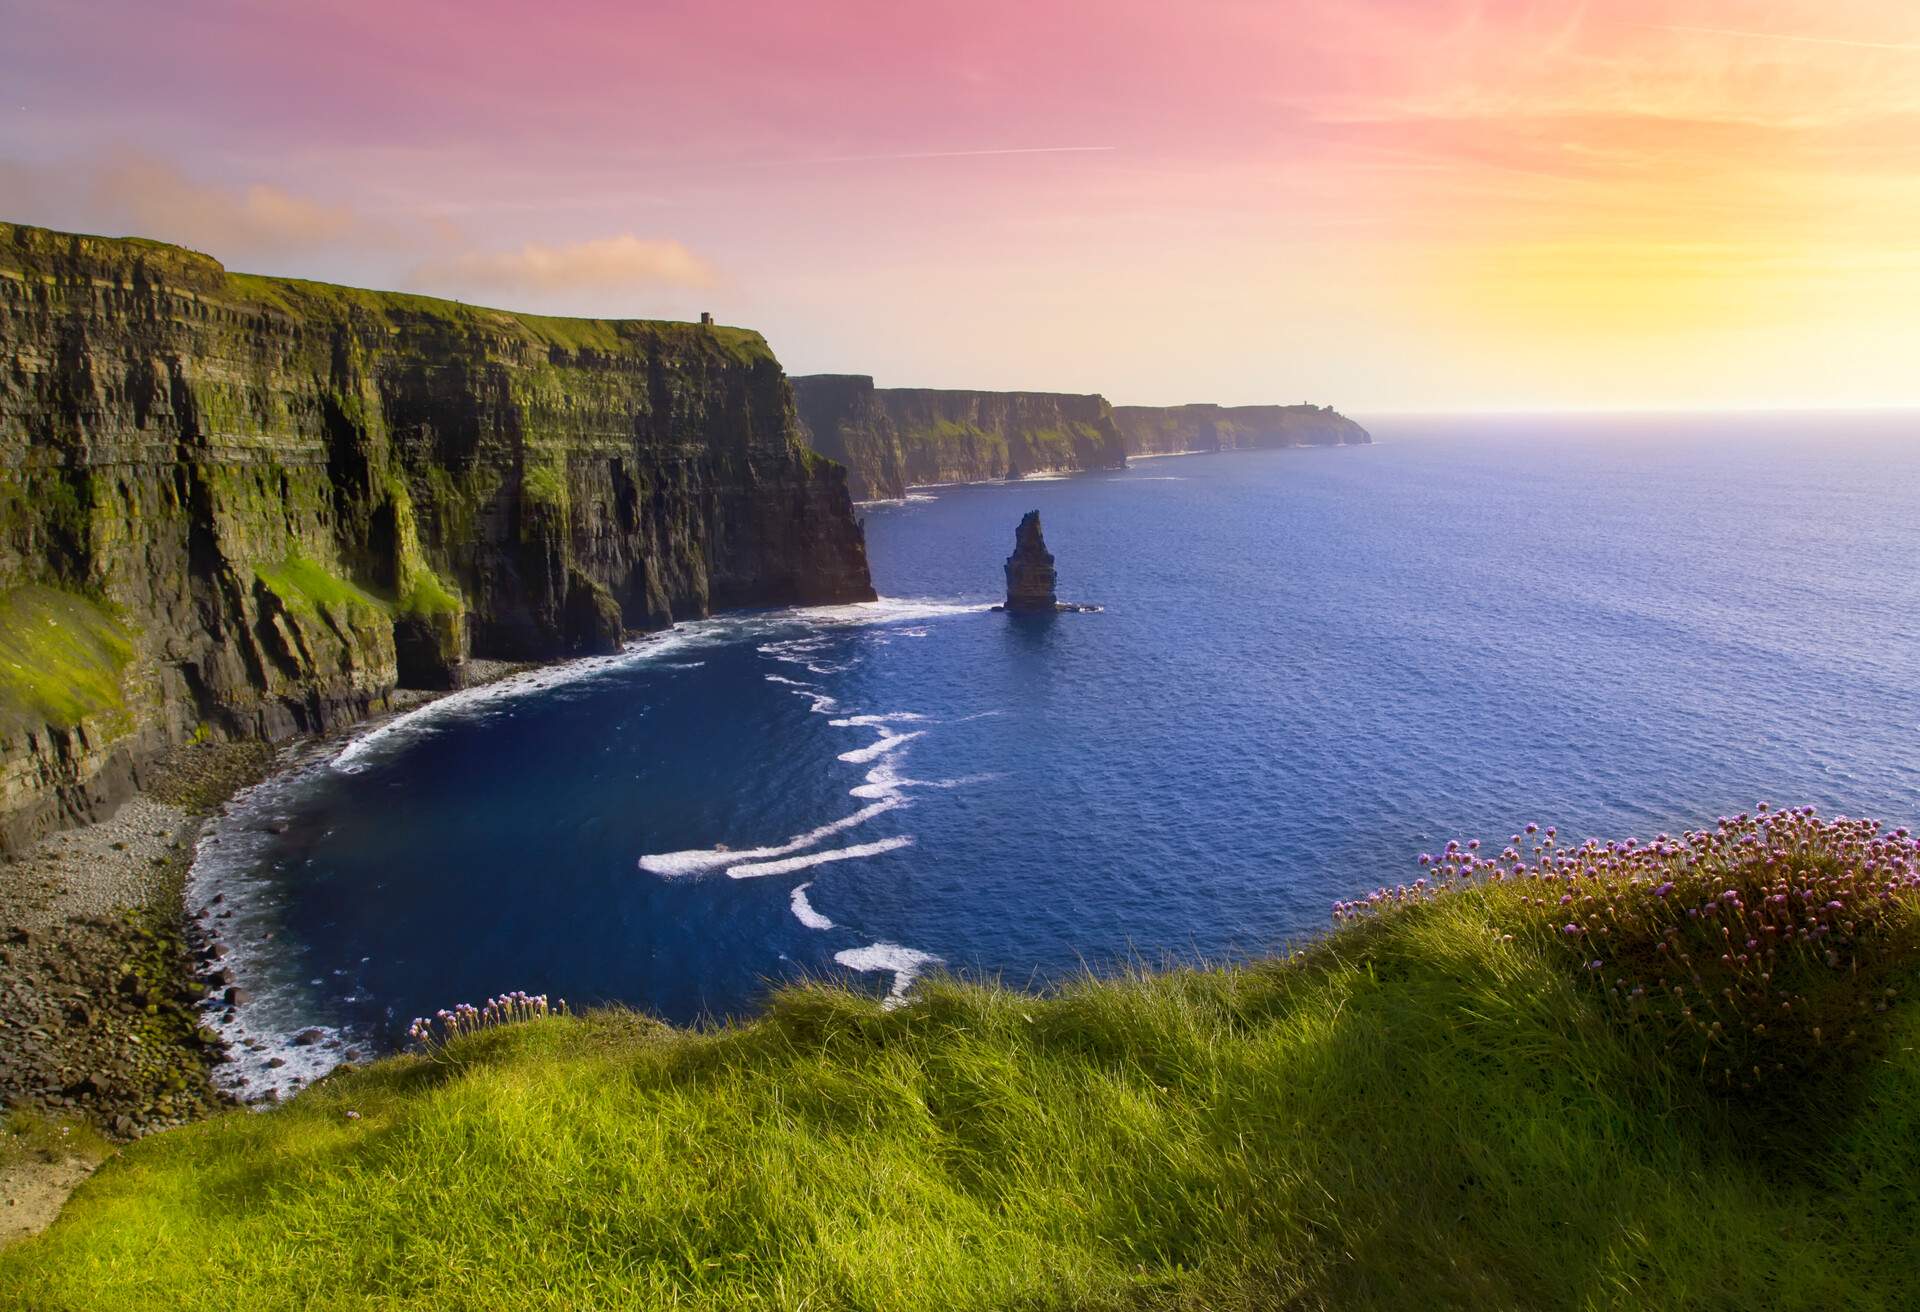 The Cliffs of Moher in County Clare are Ireland's most visited natural attraction